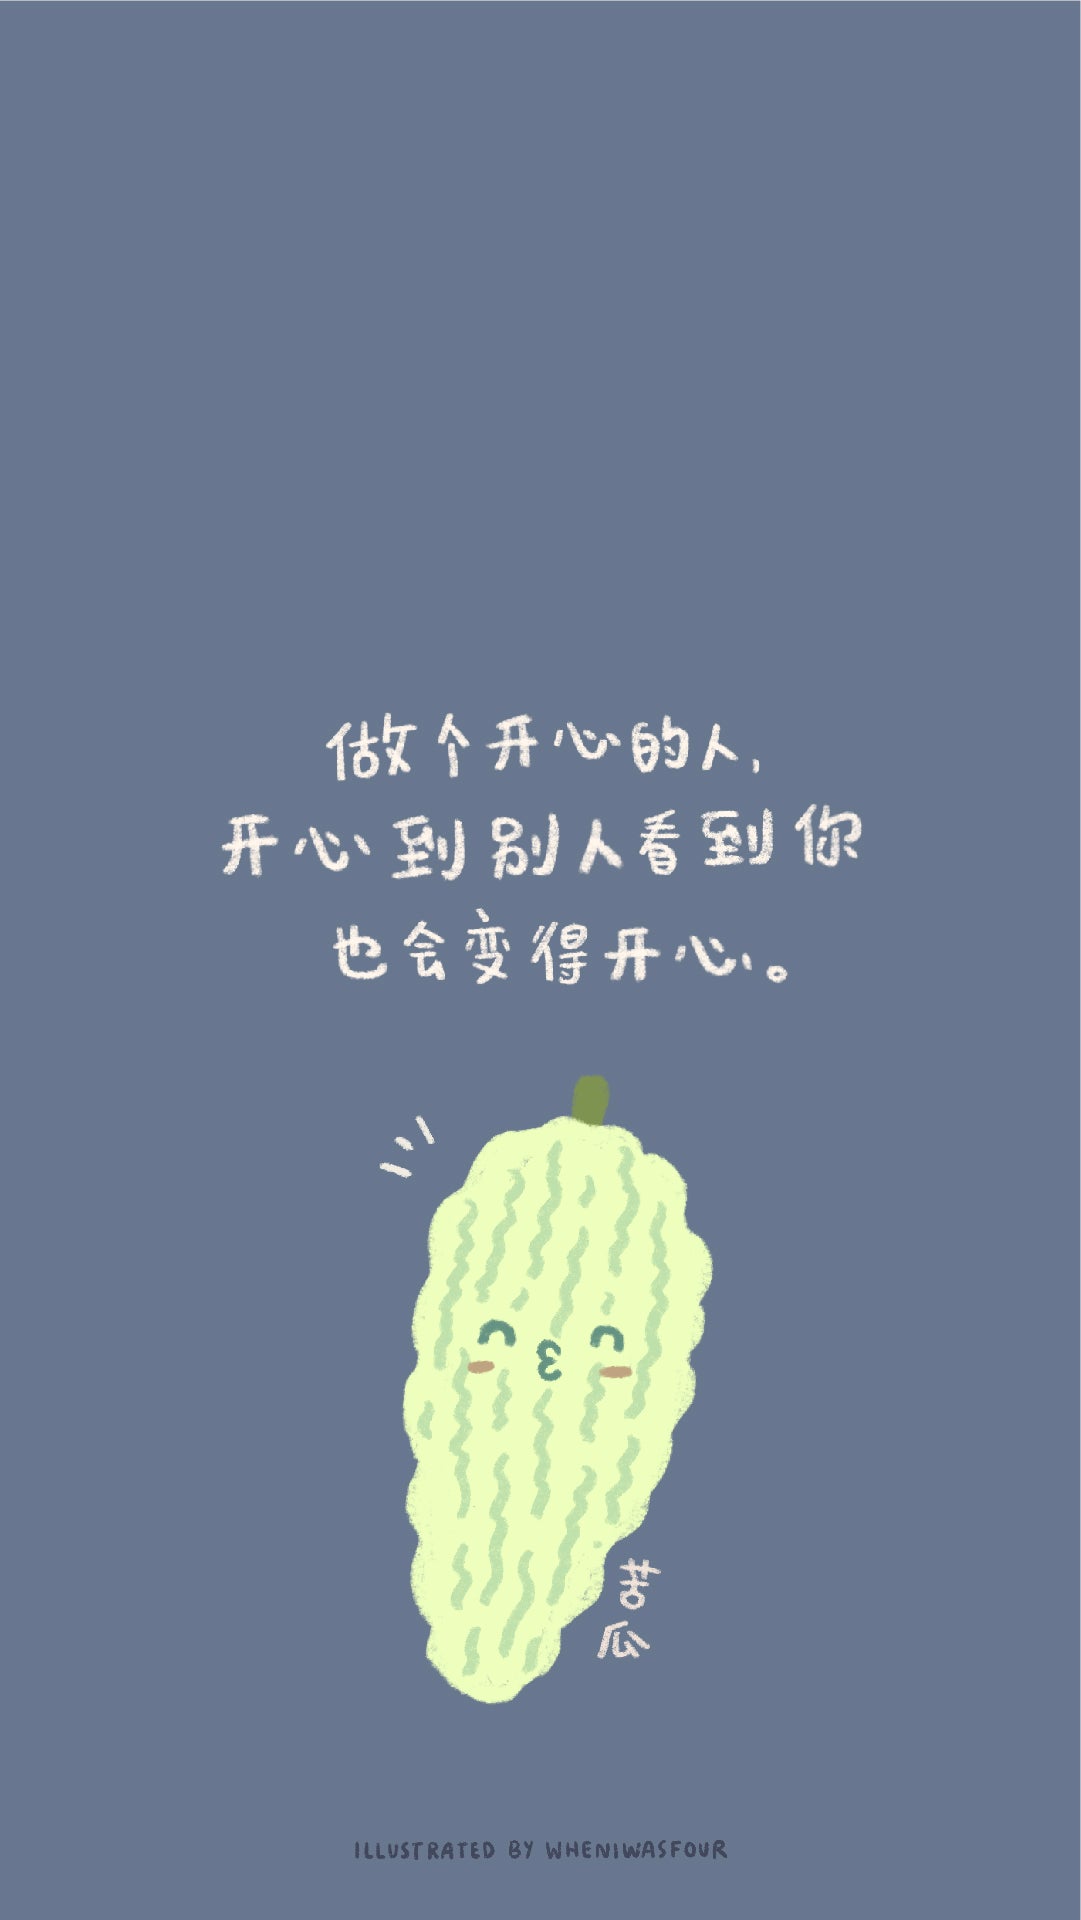 phone wallpaper of a digital illustration of a chinese verse about being a happy person and spreading happiness wheniwasfour